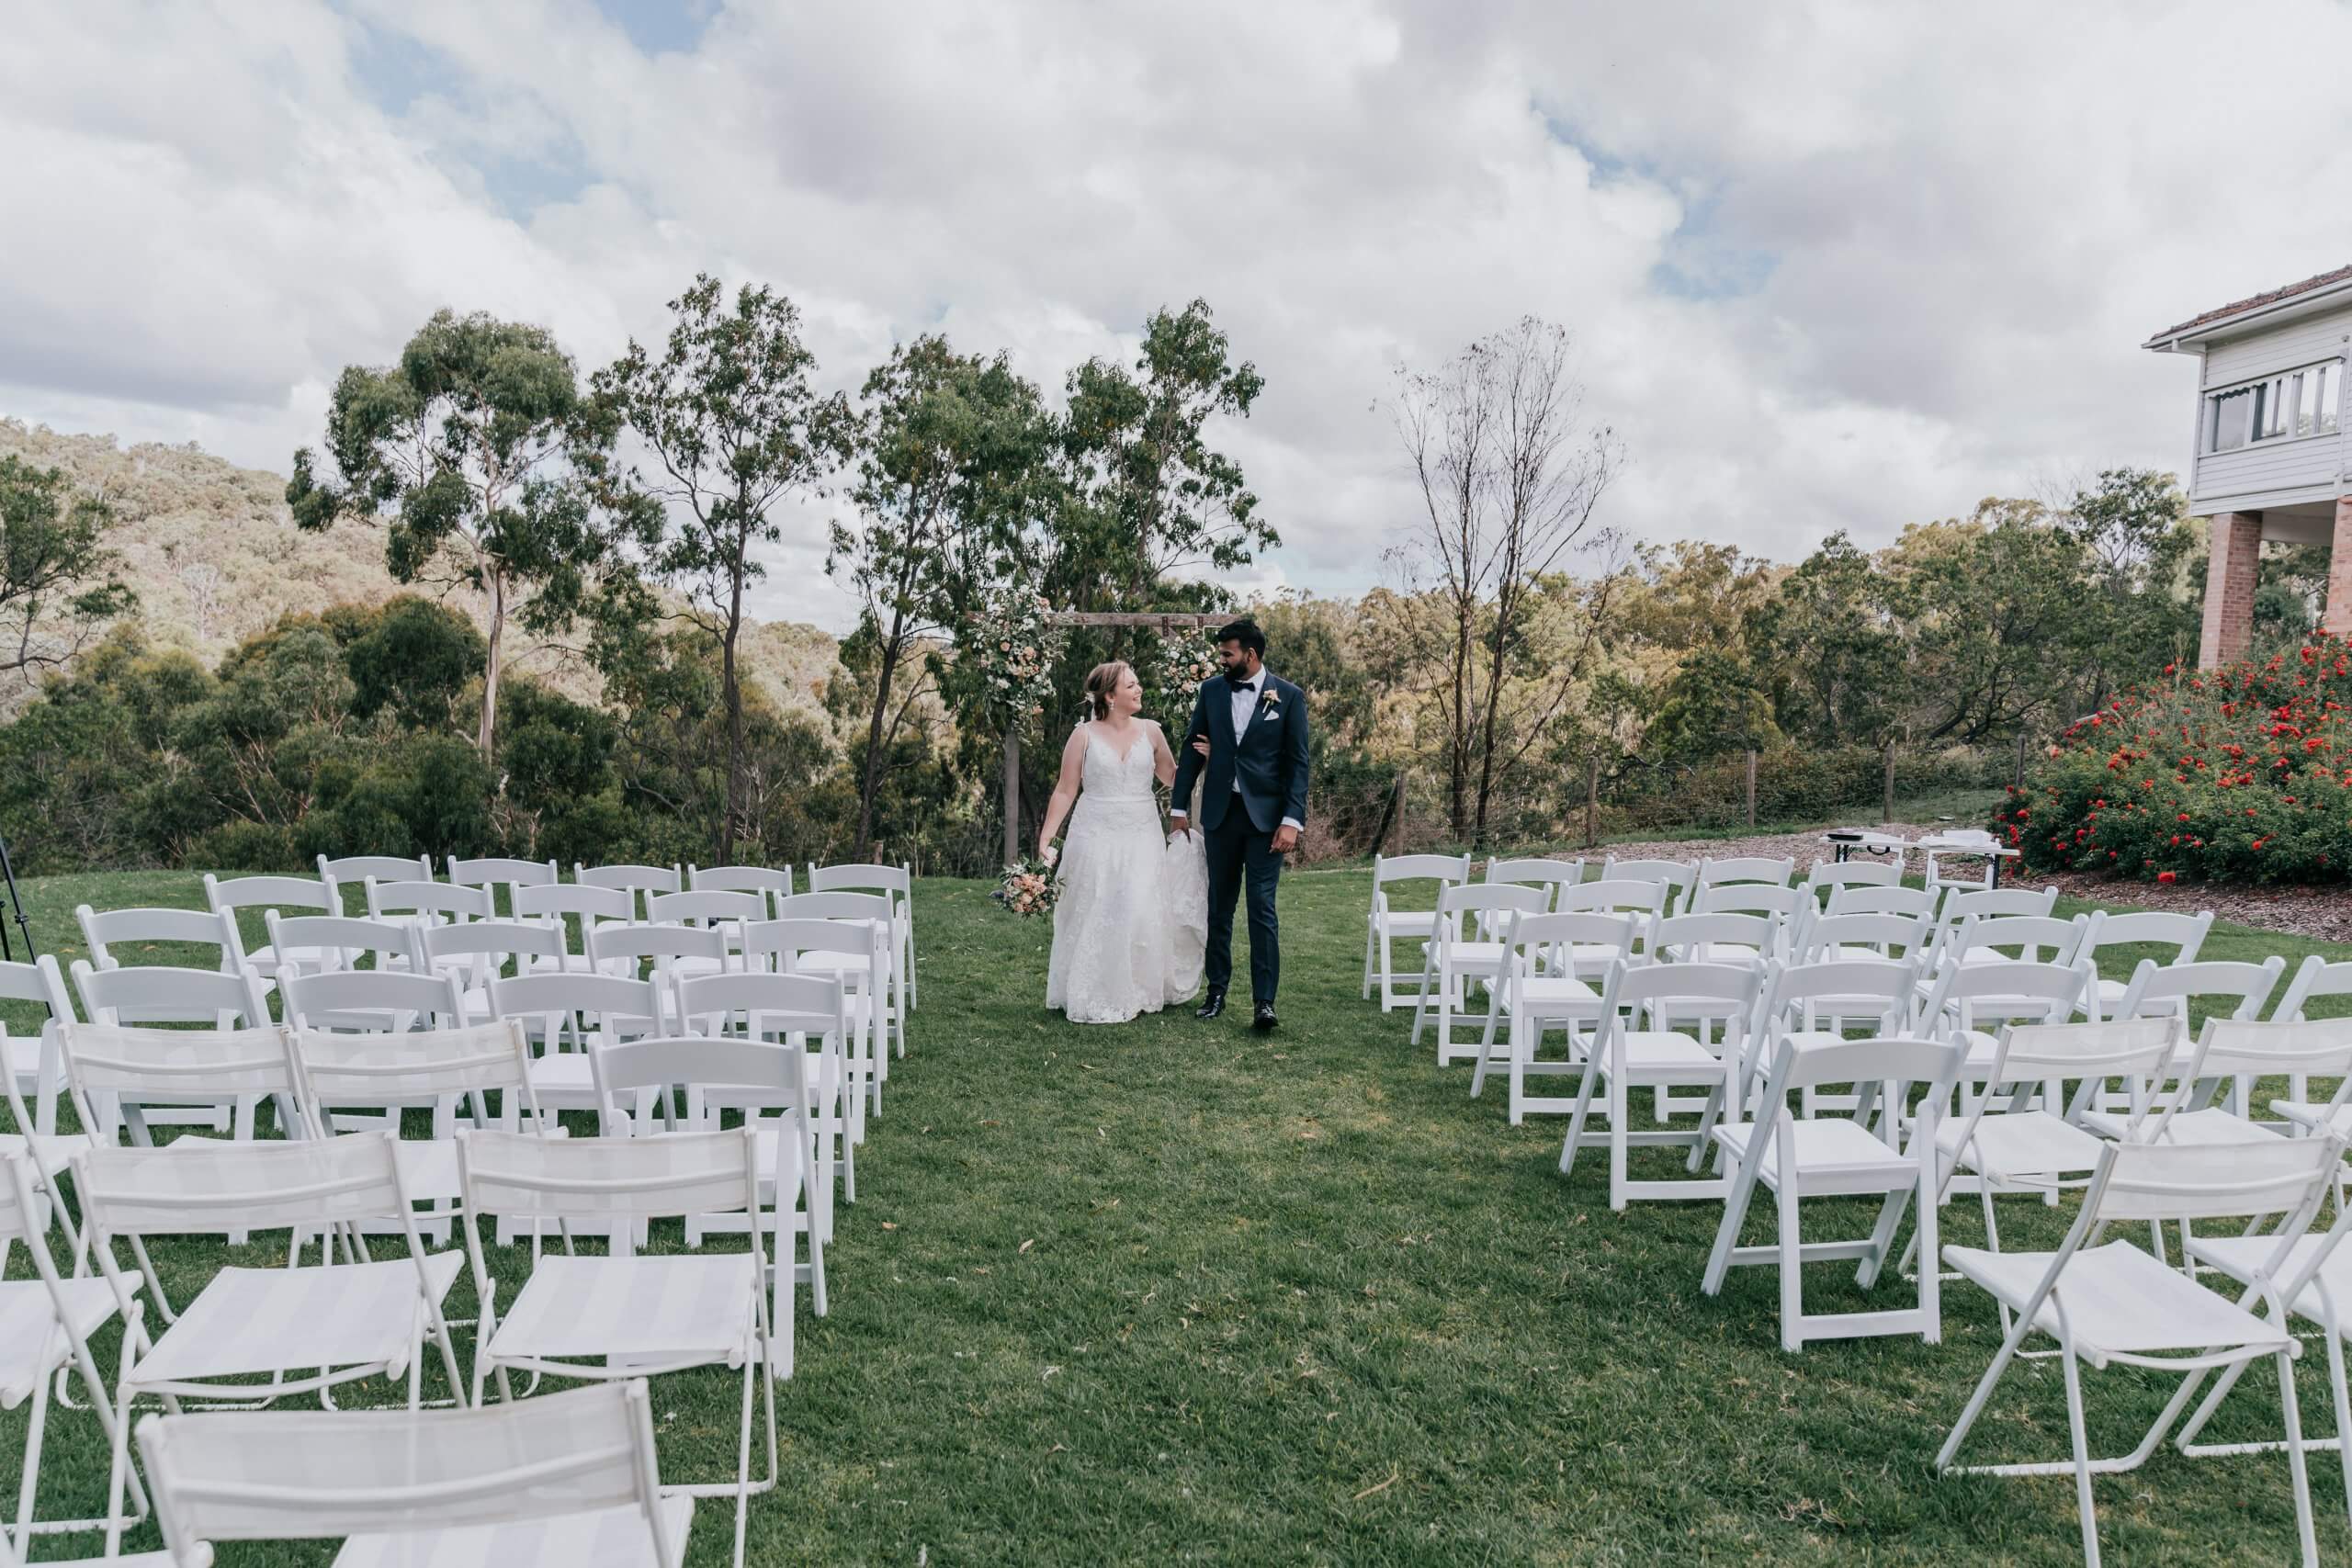 The right wedding suppliers, these white chairs matched the beautiful sky during this couple's wedding, captured by Black Avenue Productions